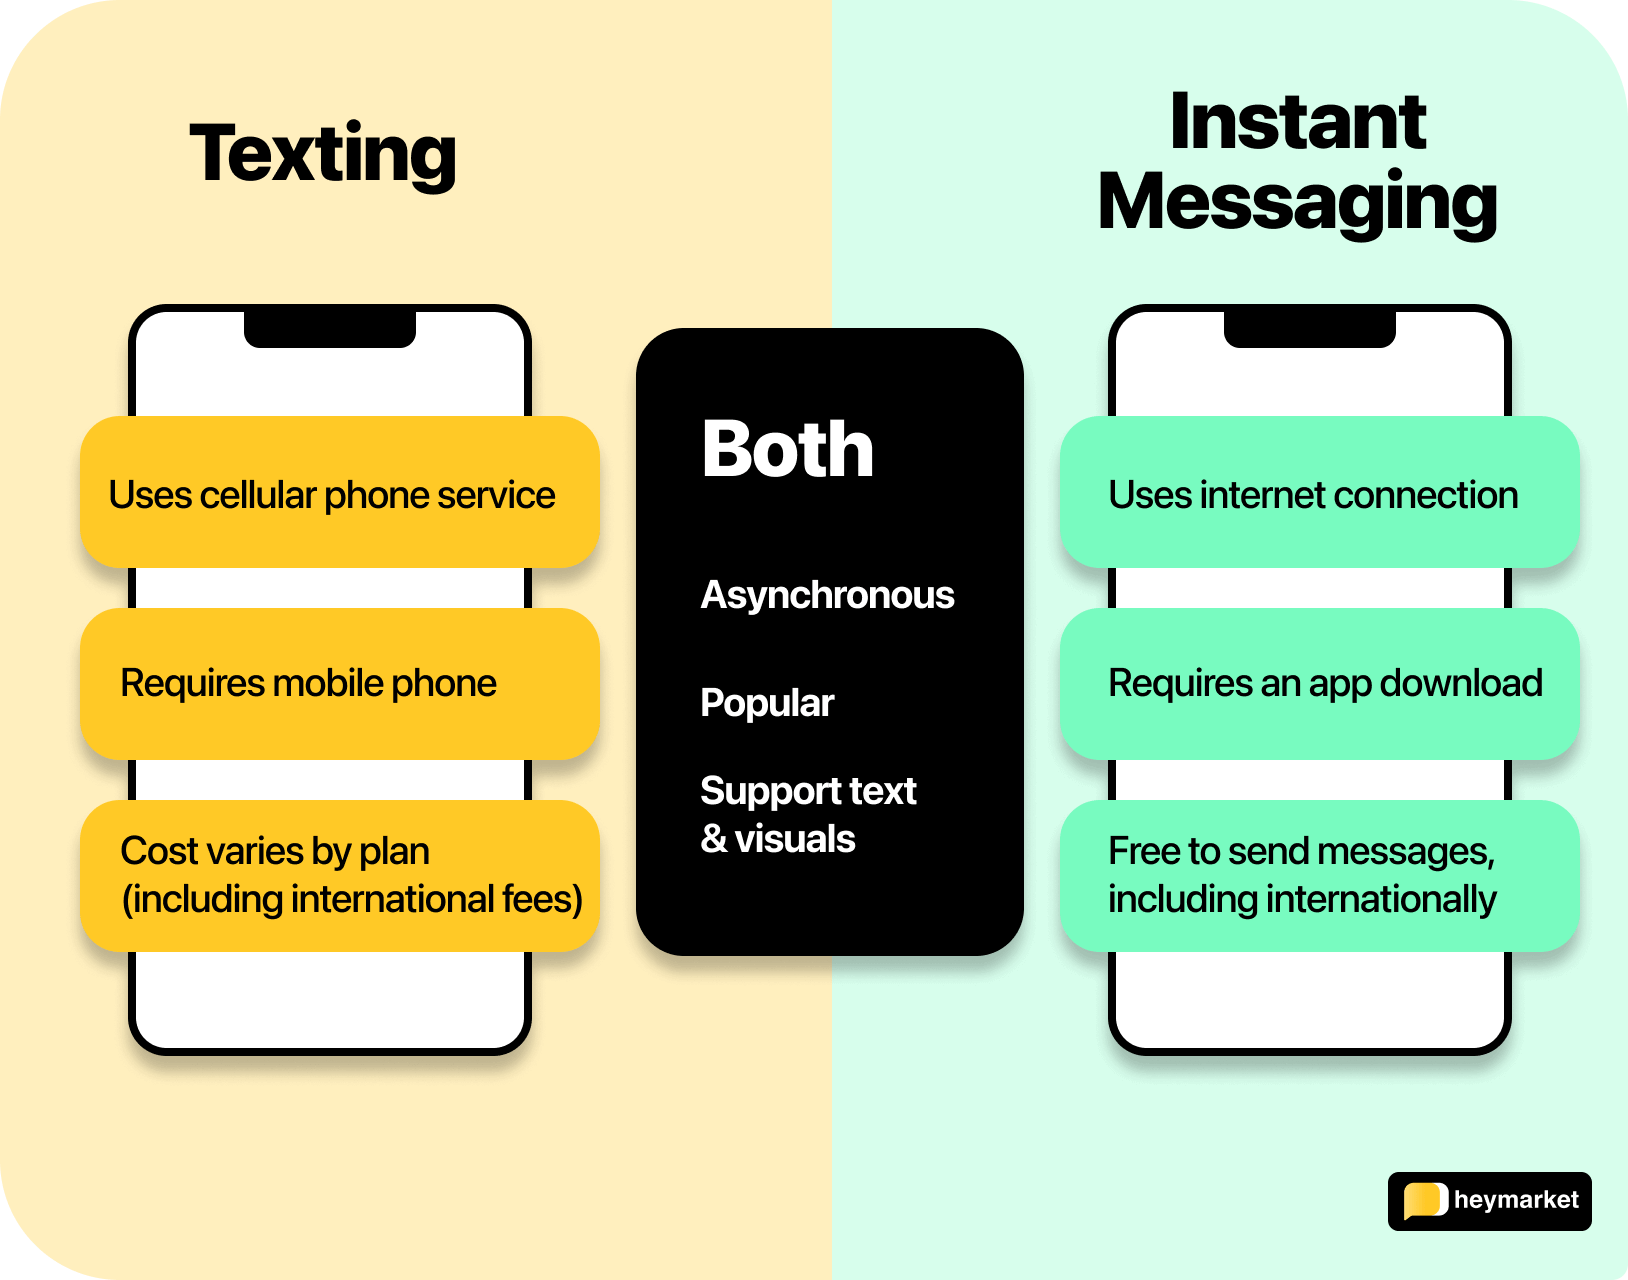 Venn diagram comparing text messaging to instant messaging.